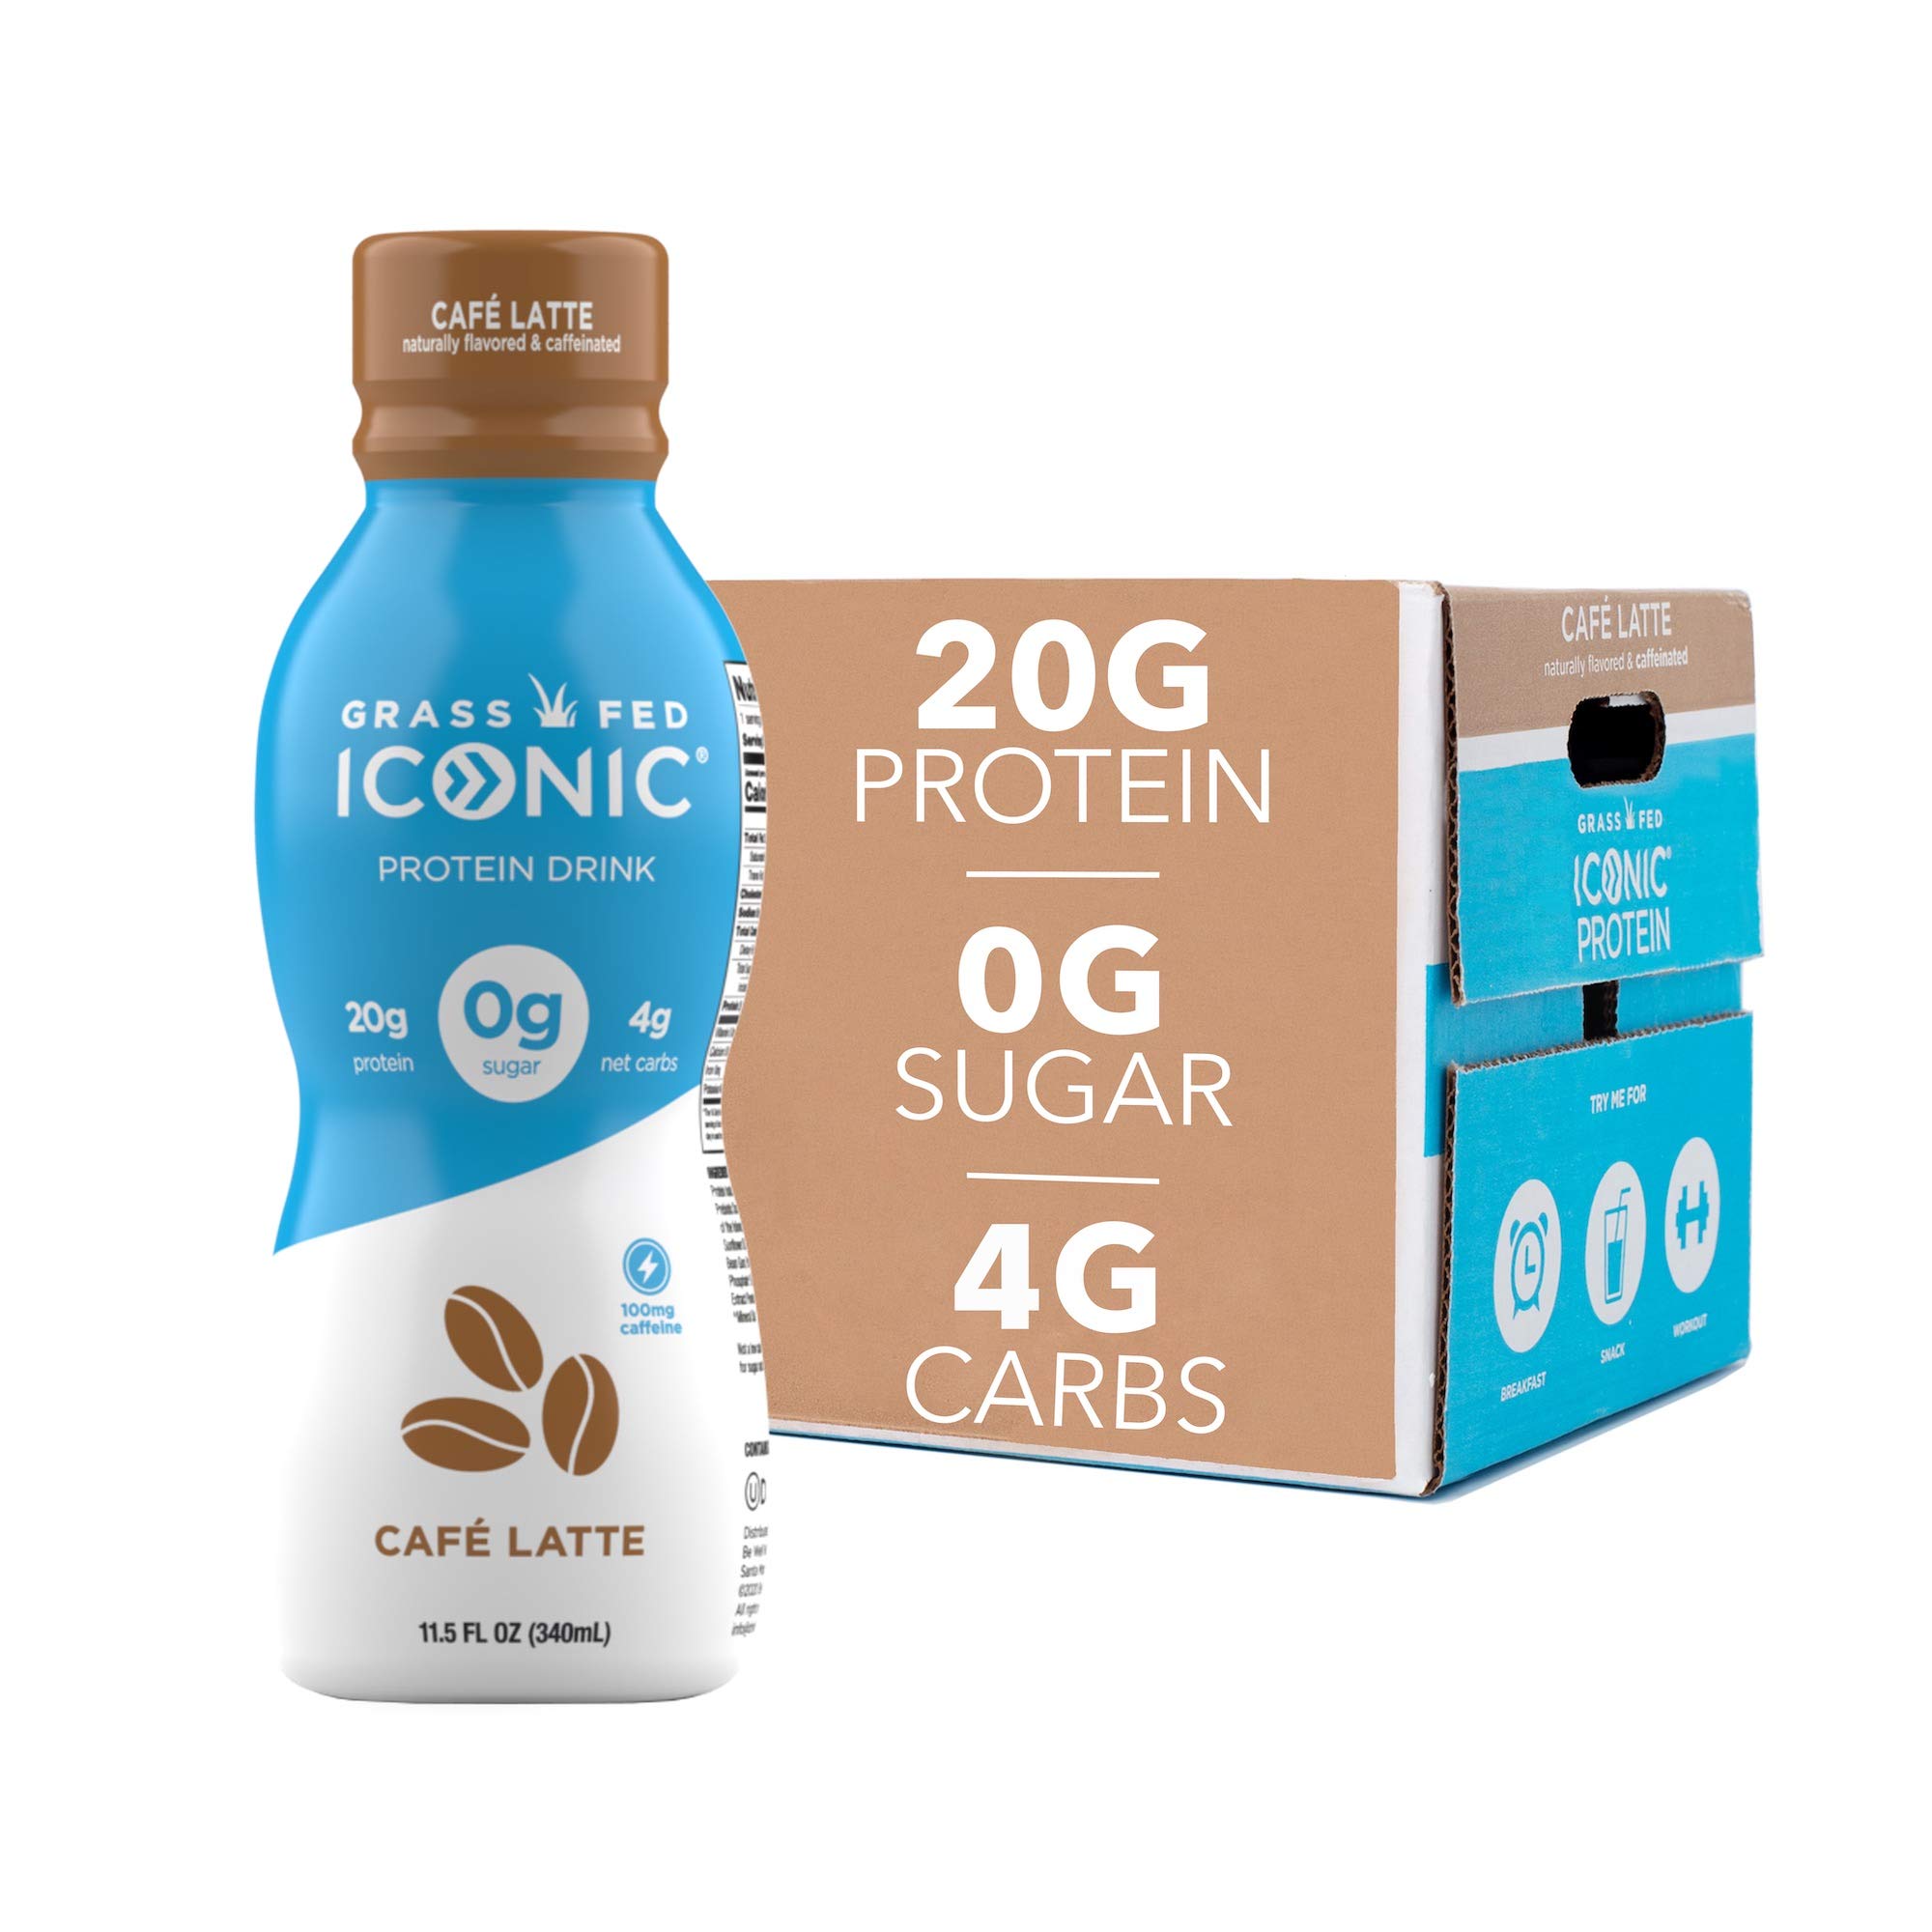 ICONIC Protein Drinks, Vanilla Bean (4 Pack) - Sugar Free & Low Carb - 20g  Grass Fed Protein - Lactose Free, Gluten Free, Keto Protein Shakes